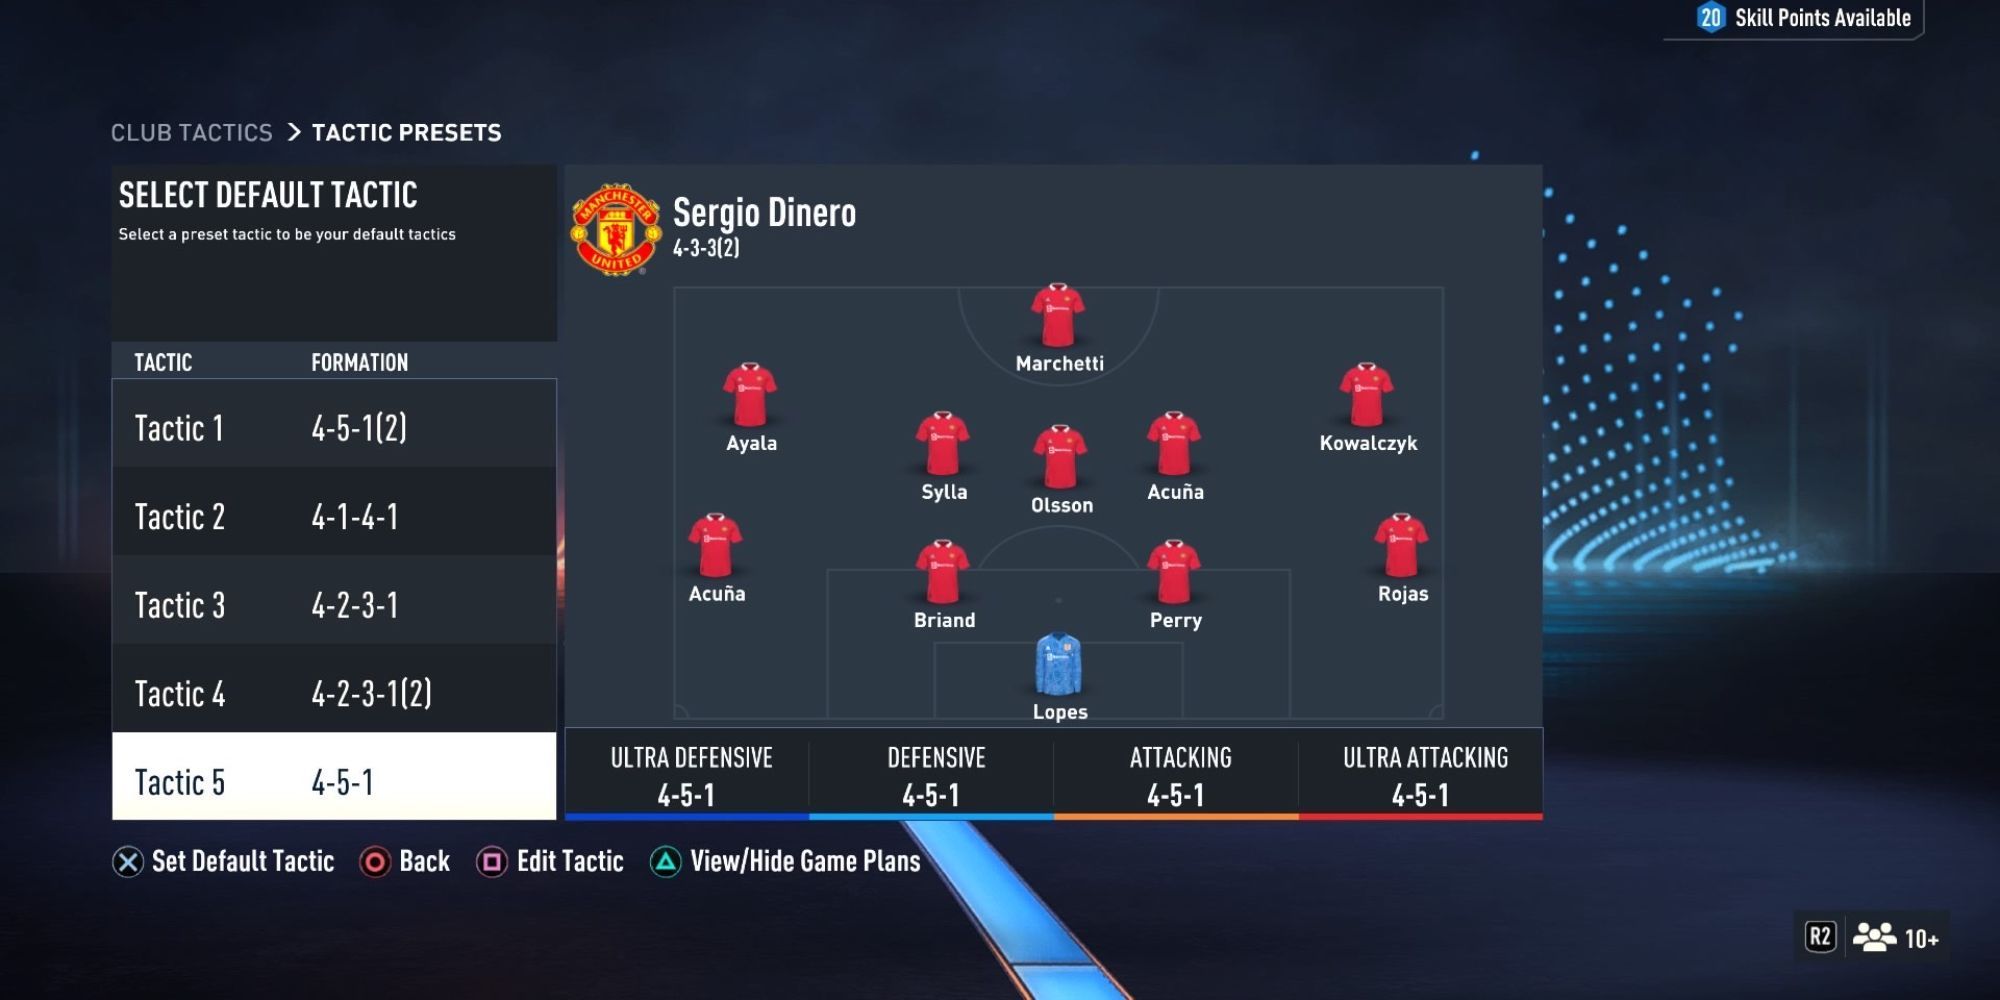 The club tactics page on FIFA 23 Pro Clubs